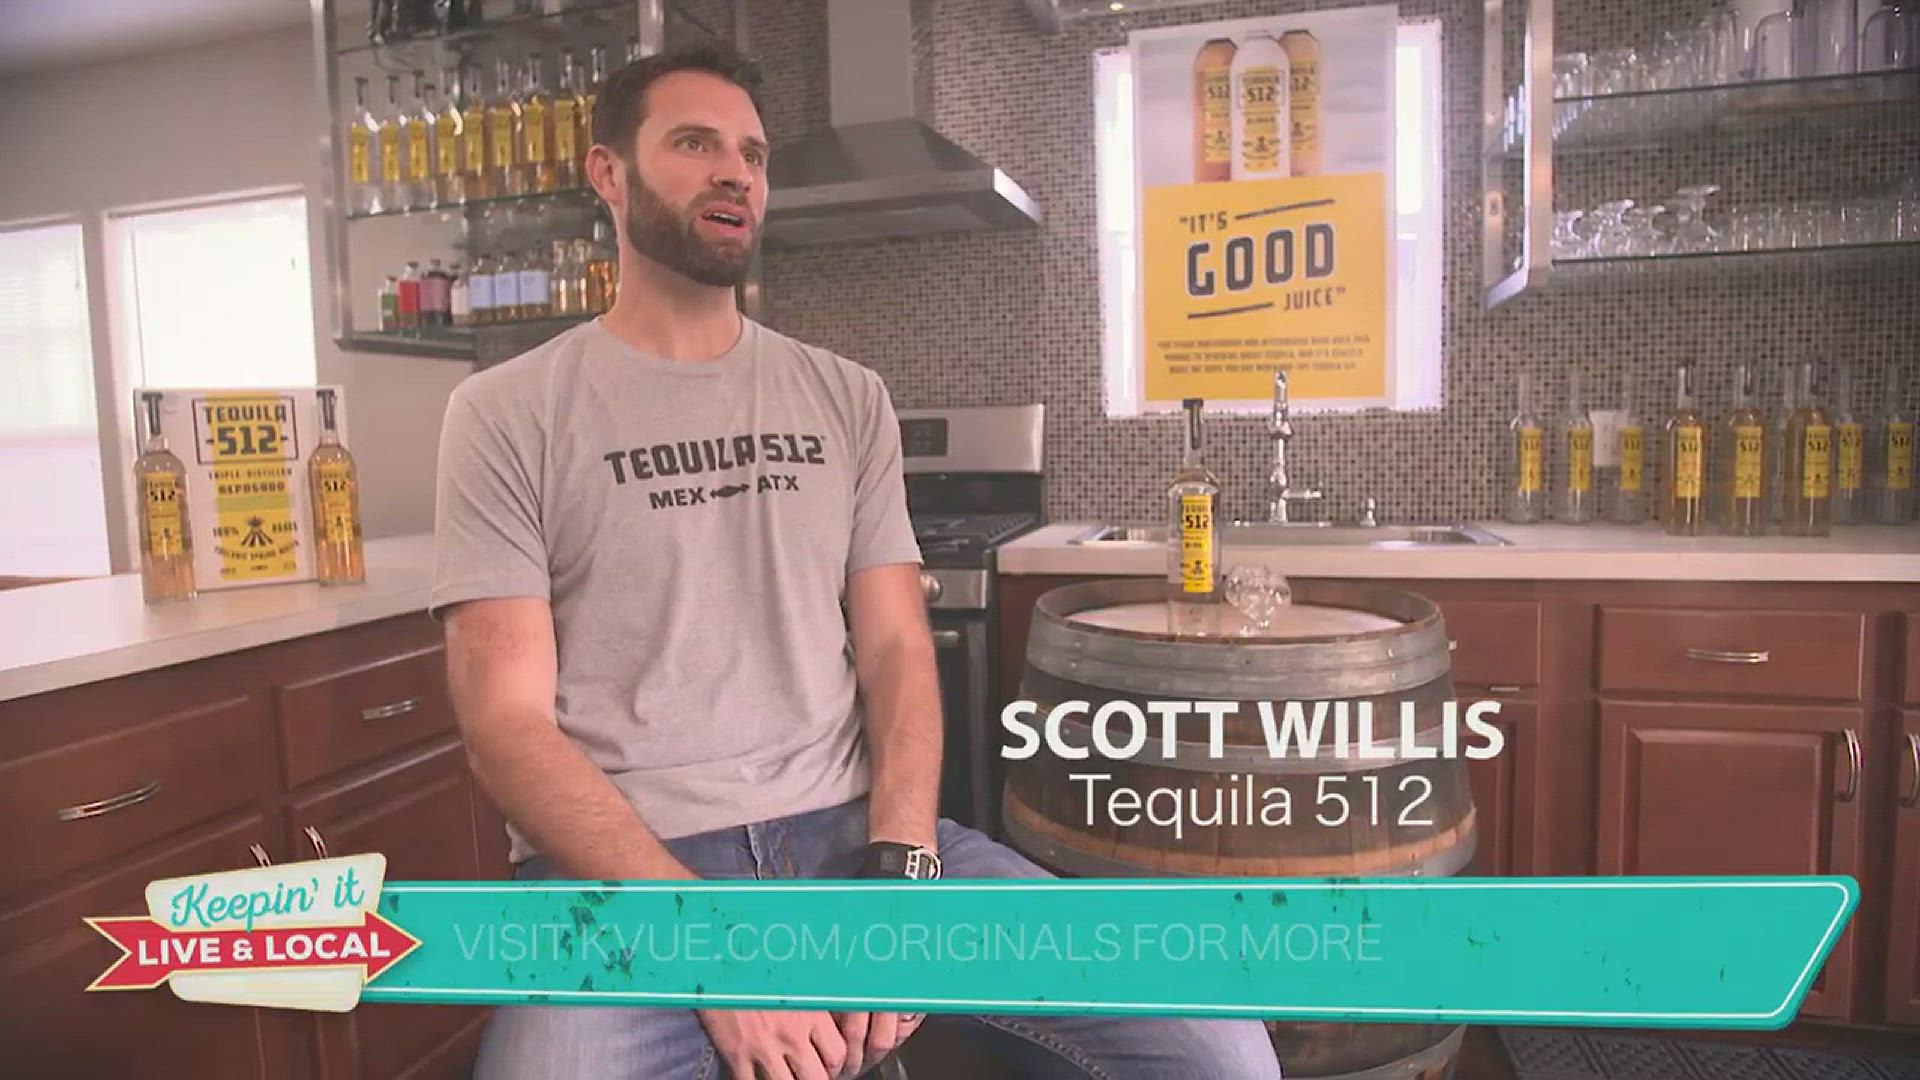 Tequila 512 is locally owned and operated. President and founder, Scott Willis talks about why local music is as important to him as it is to the city of Austin.